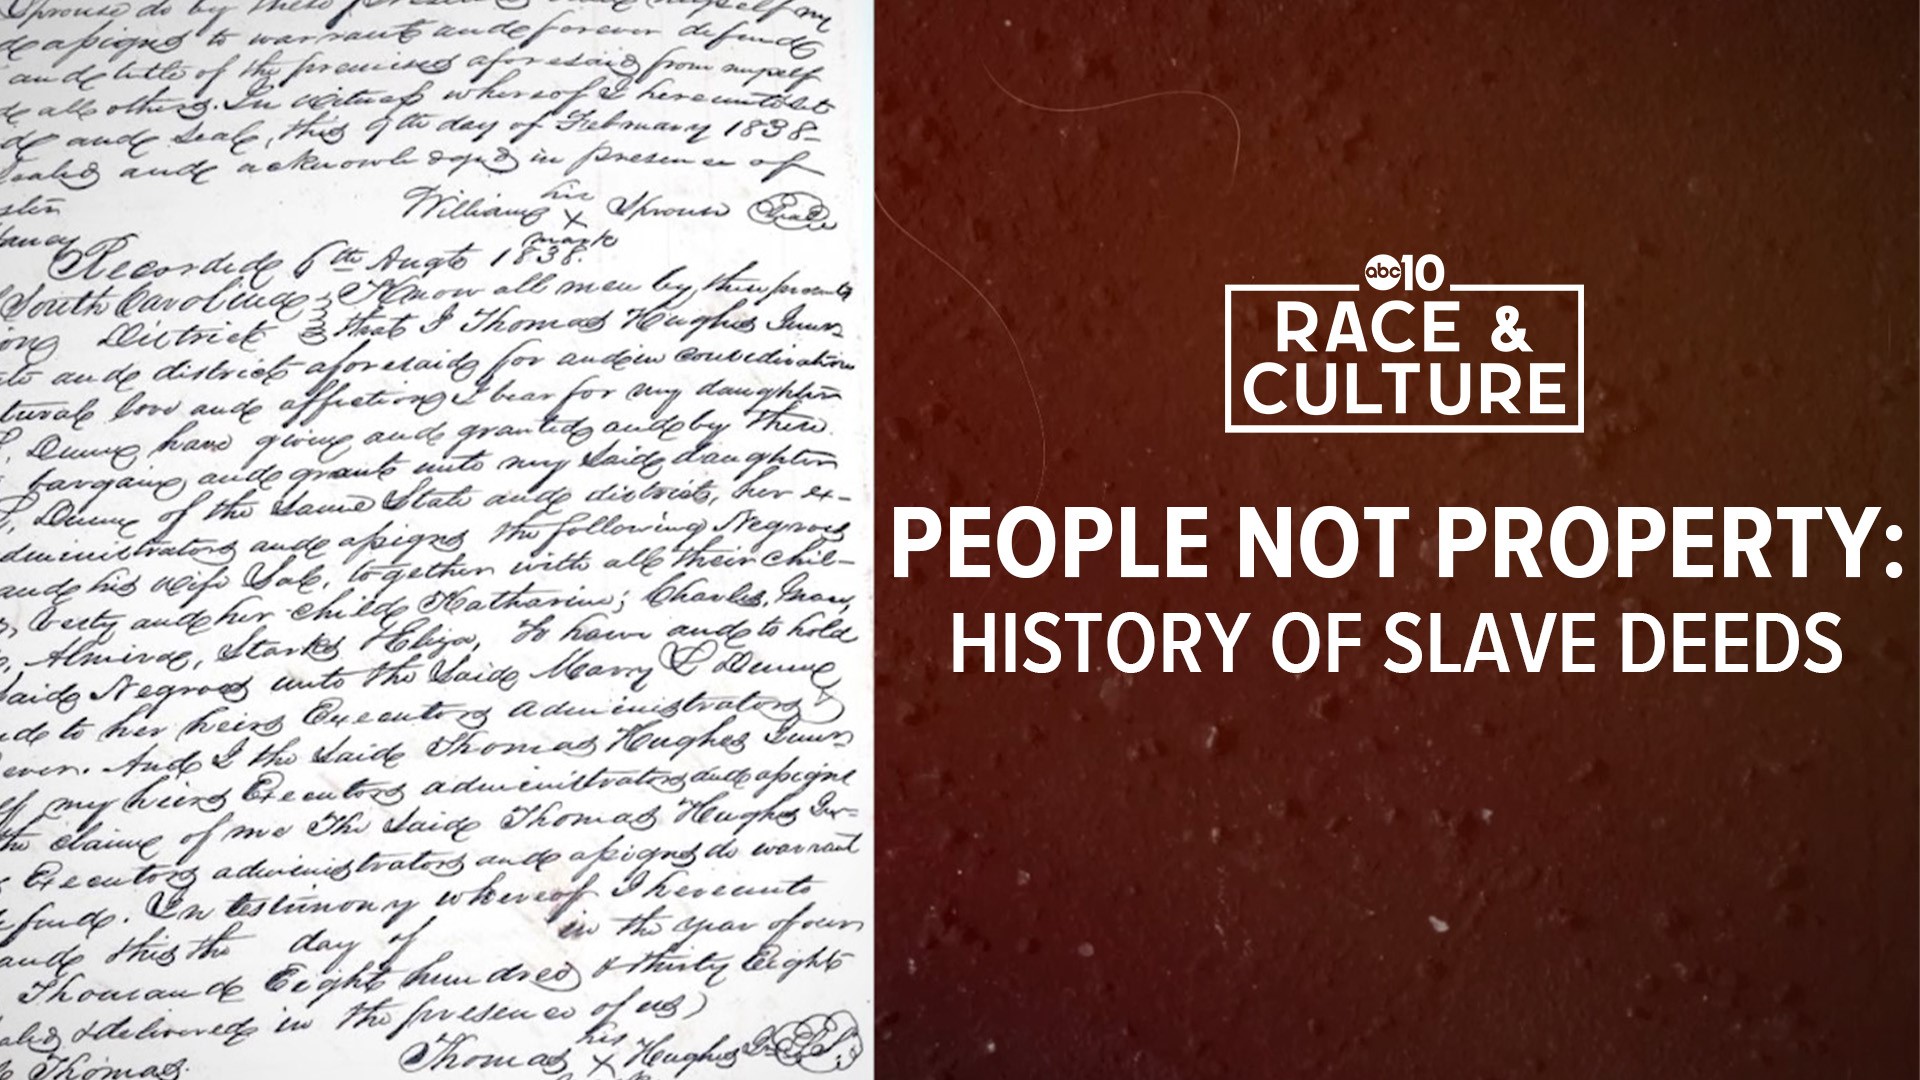 During the slavery era in America, enslaved people were considered property by law. A Dixon man obtained a copy of a slave deed that told the story of his ancestors.